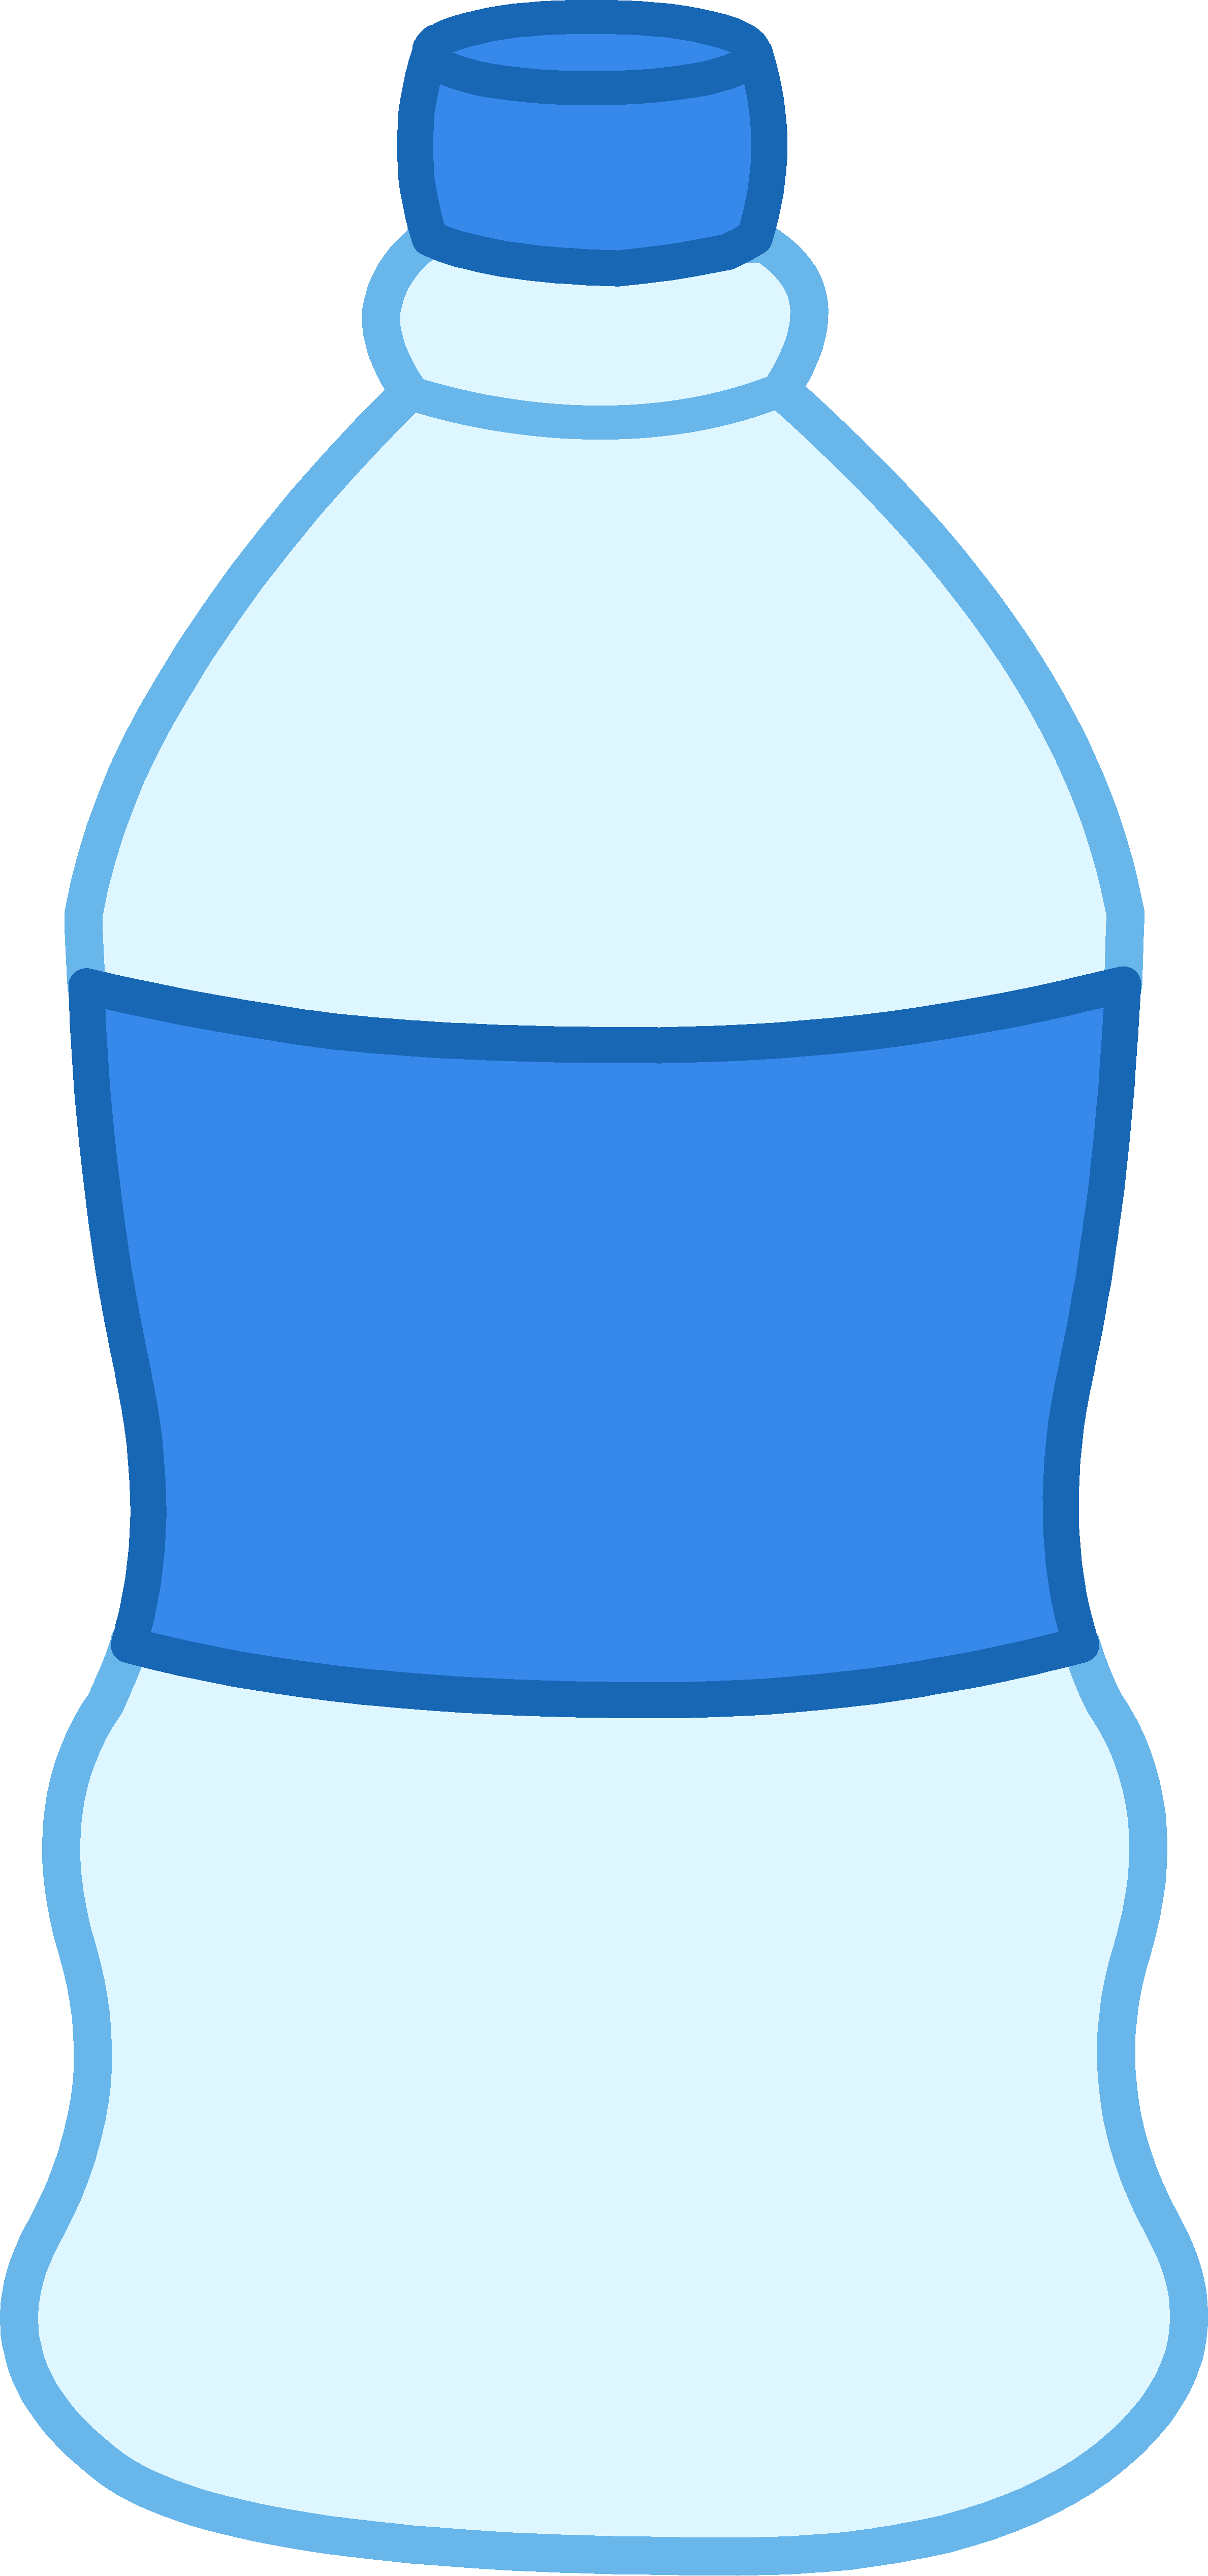 Plastic Water Bottle Black And White Clipart